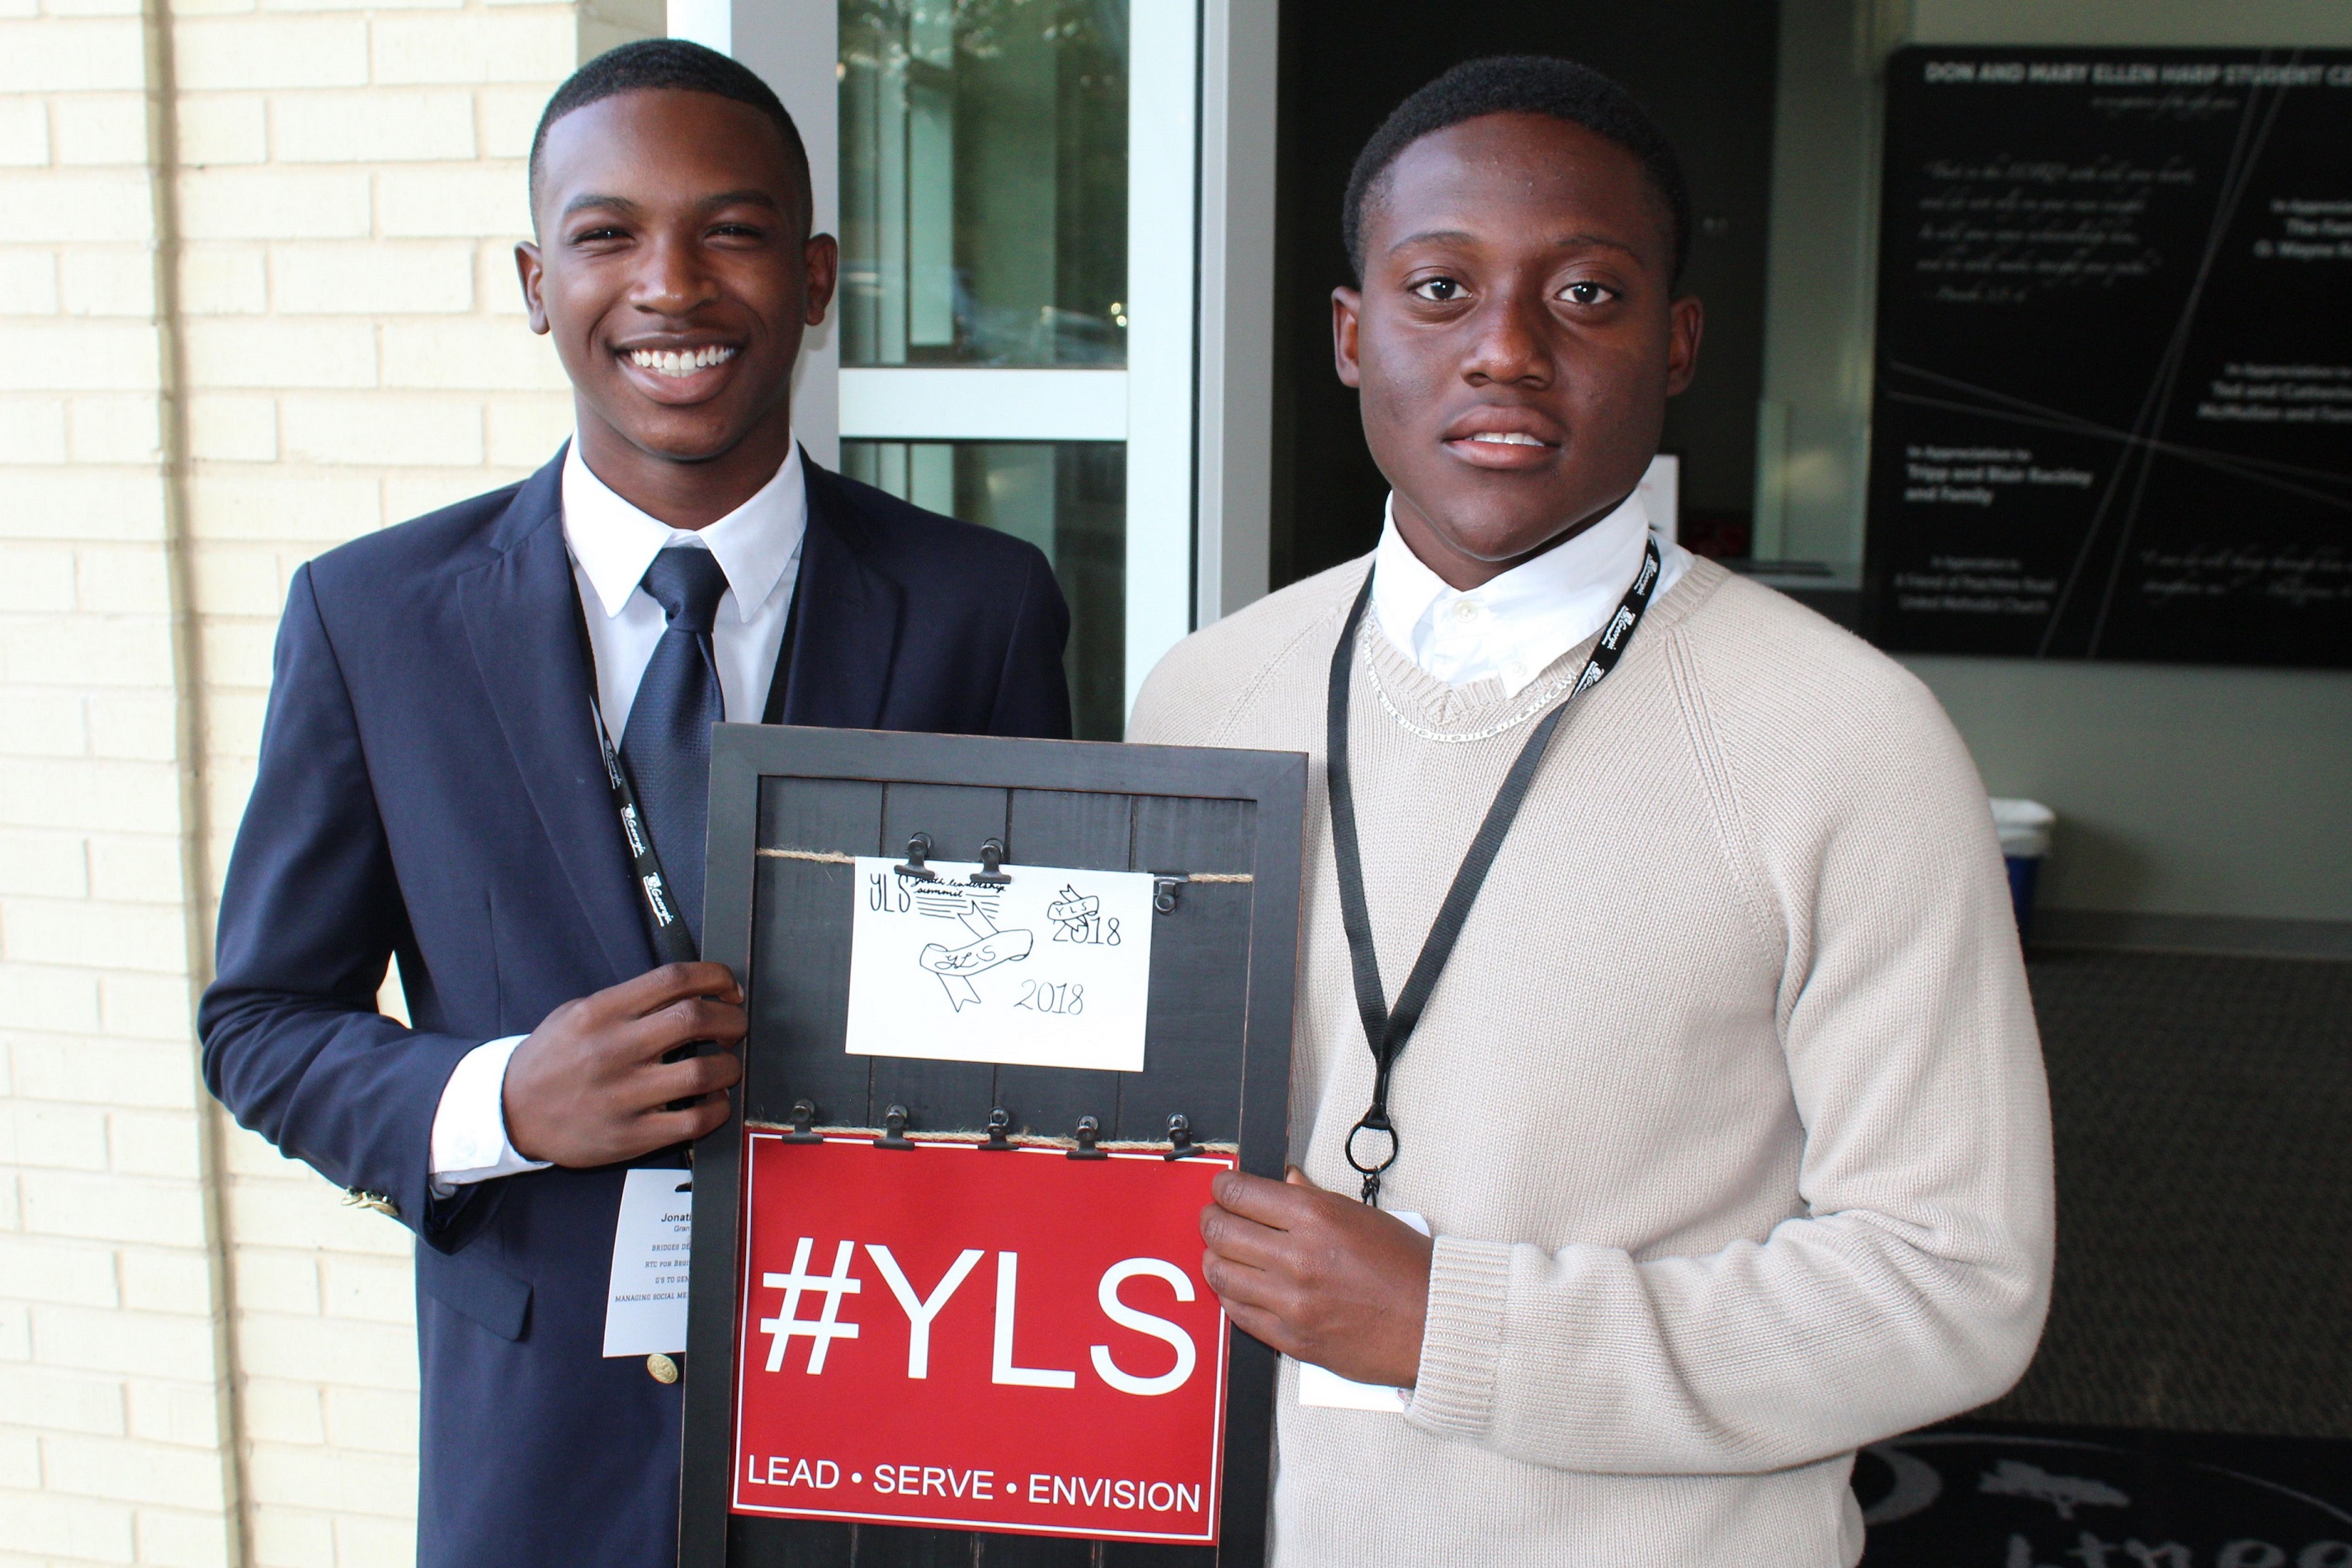 YLS leaders